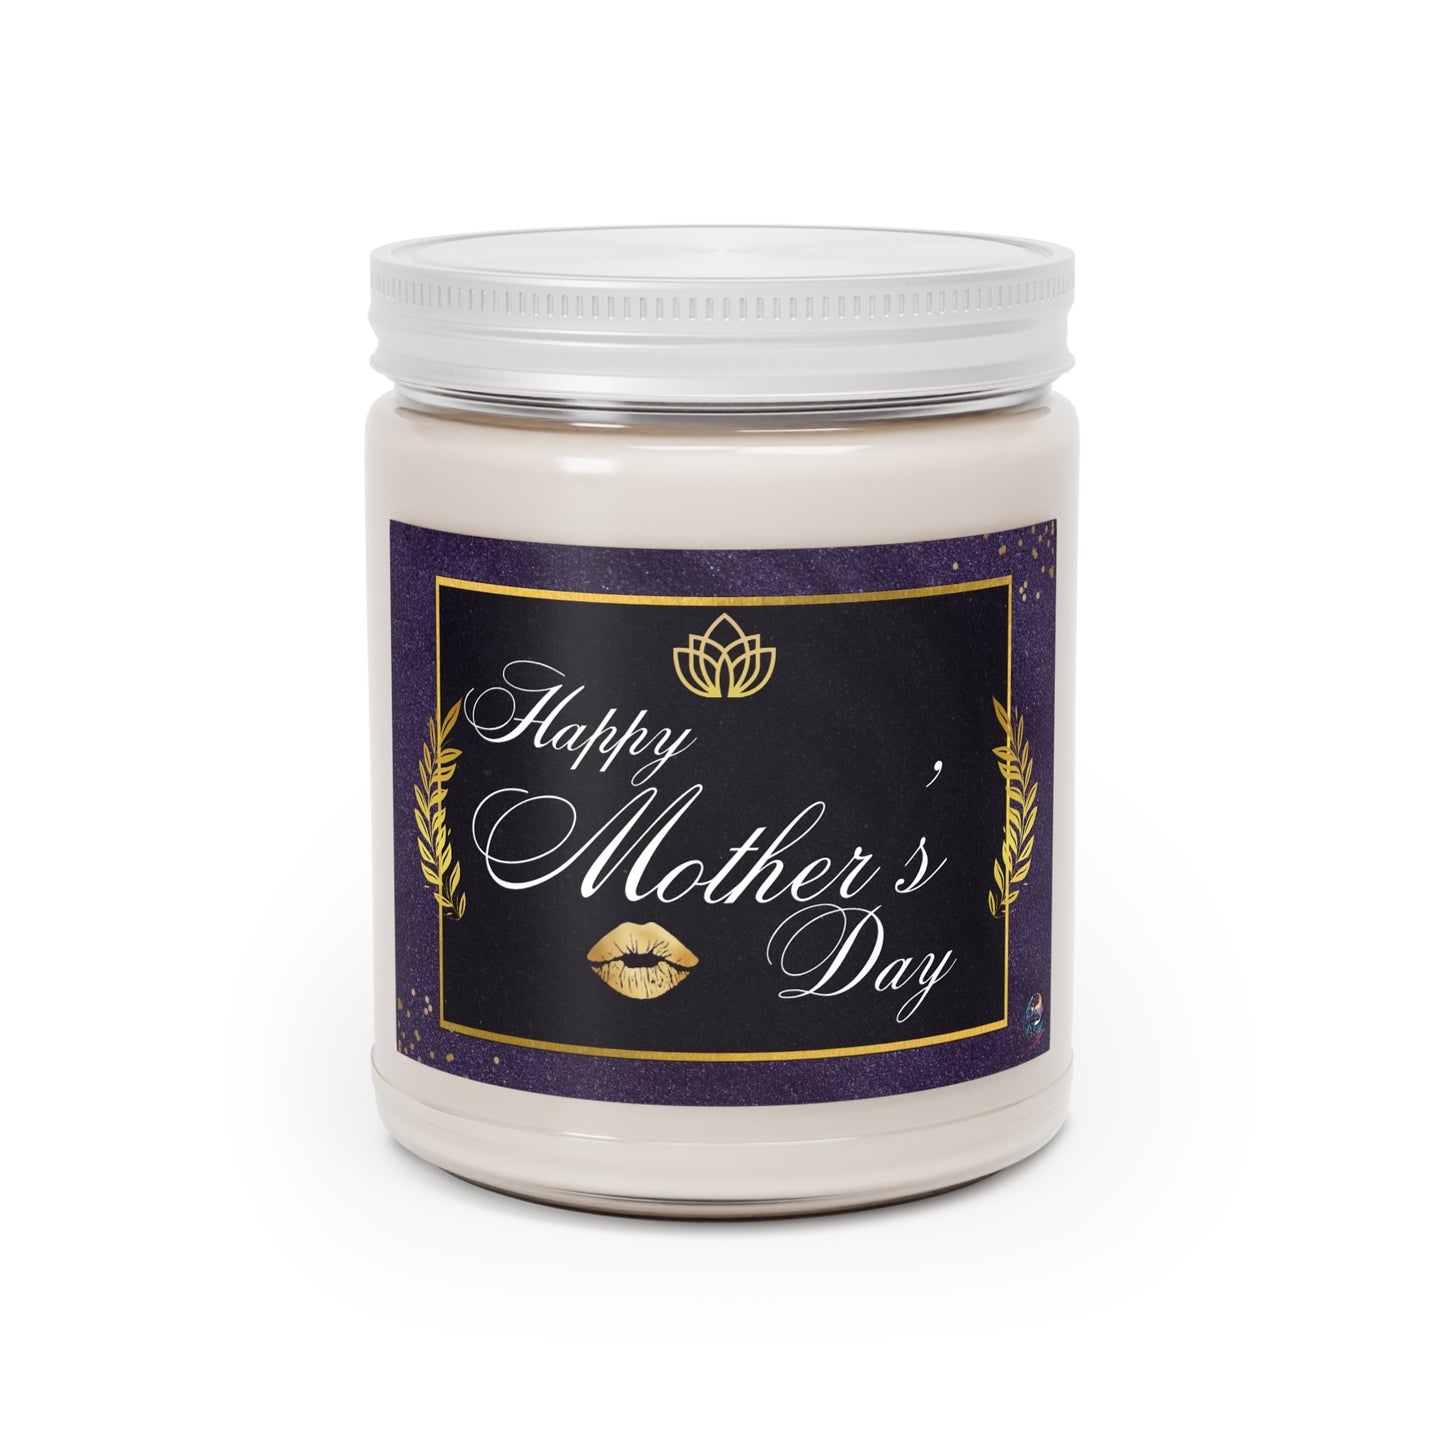 KISSED Mother's Day Scented Candles, 9oz